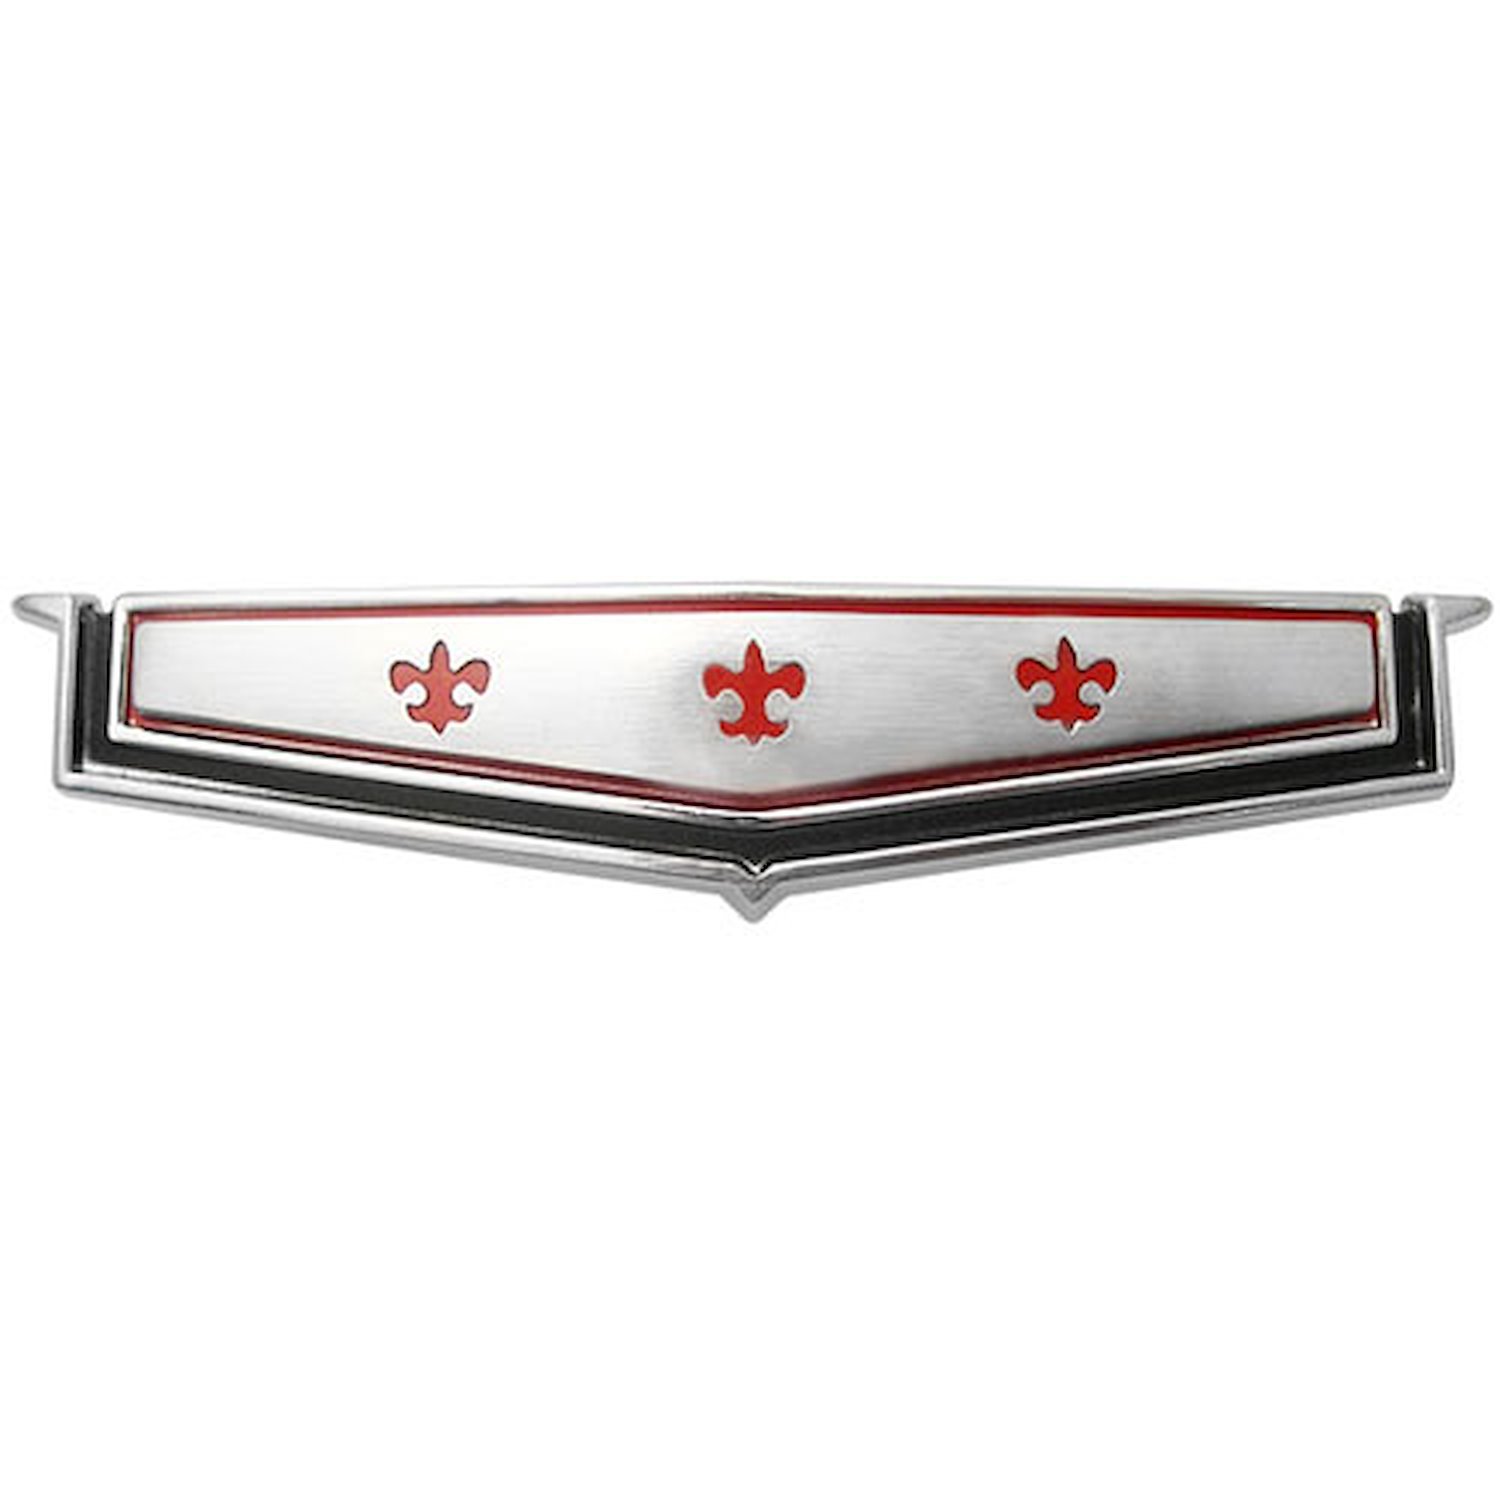 Rear Roof Panel Emblem 1965-66 Chevy Caprice